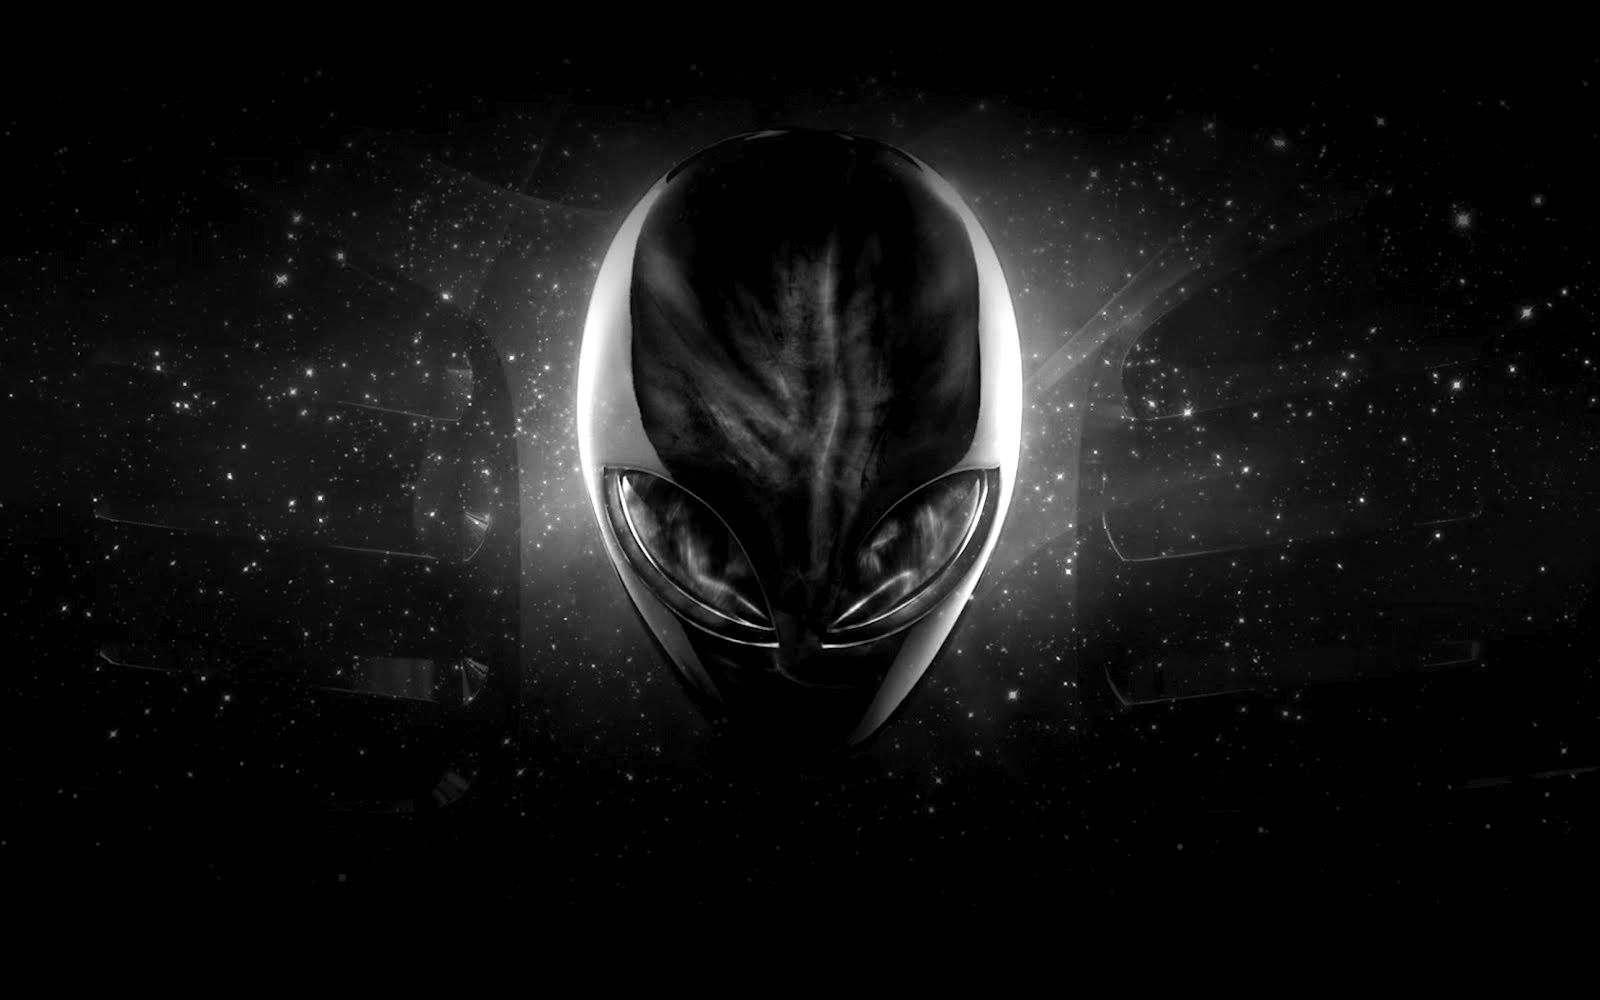 Download The Best Alien Wallpapers Here | Aliens and UFO Sightings